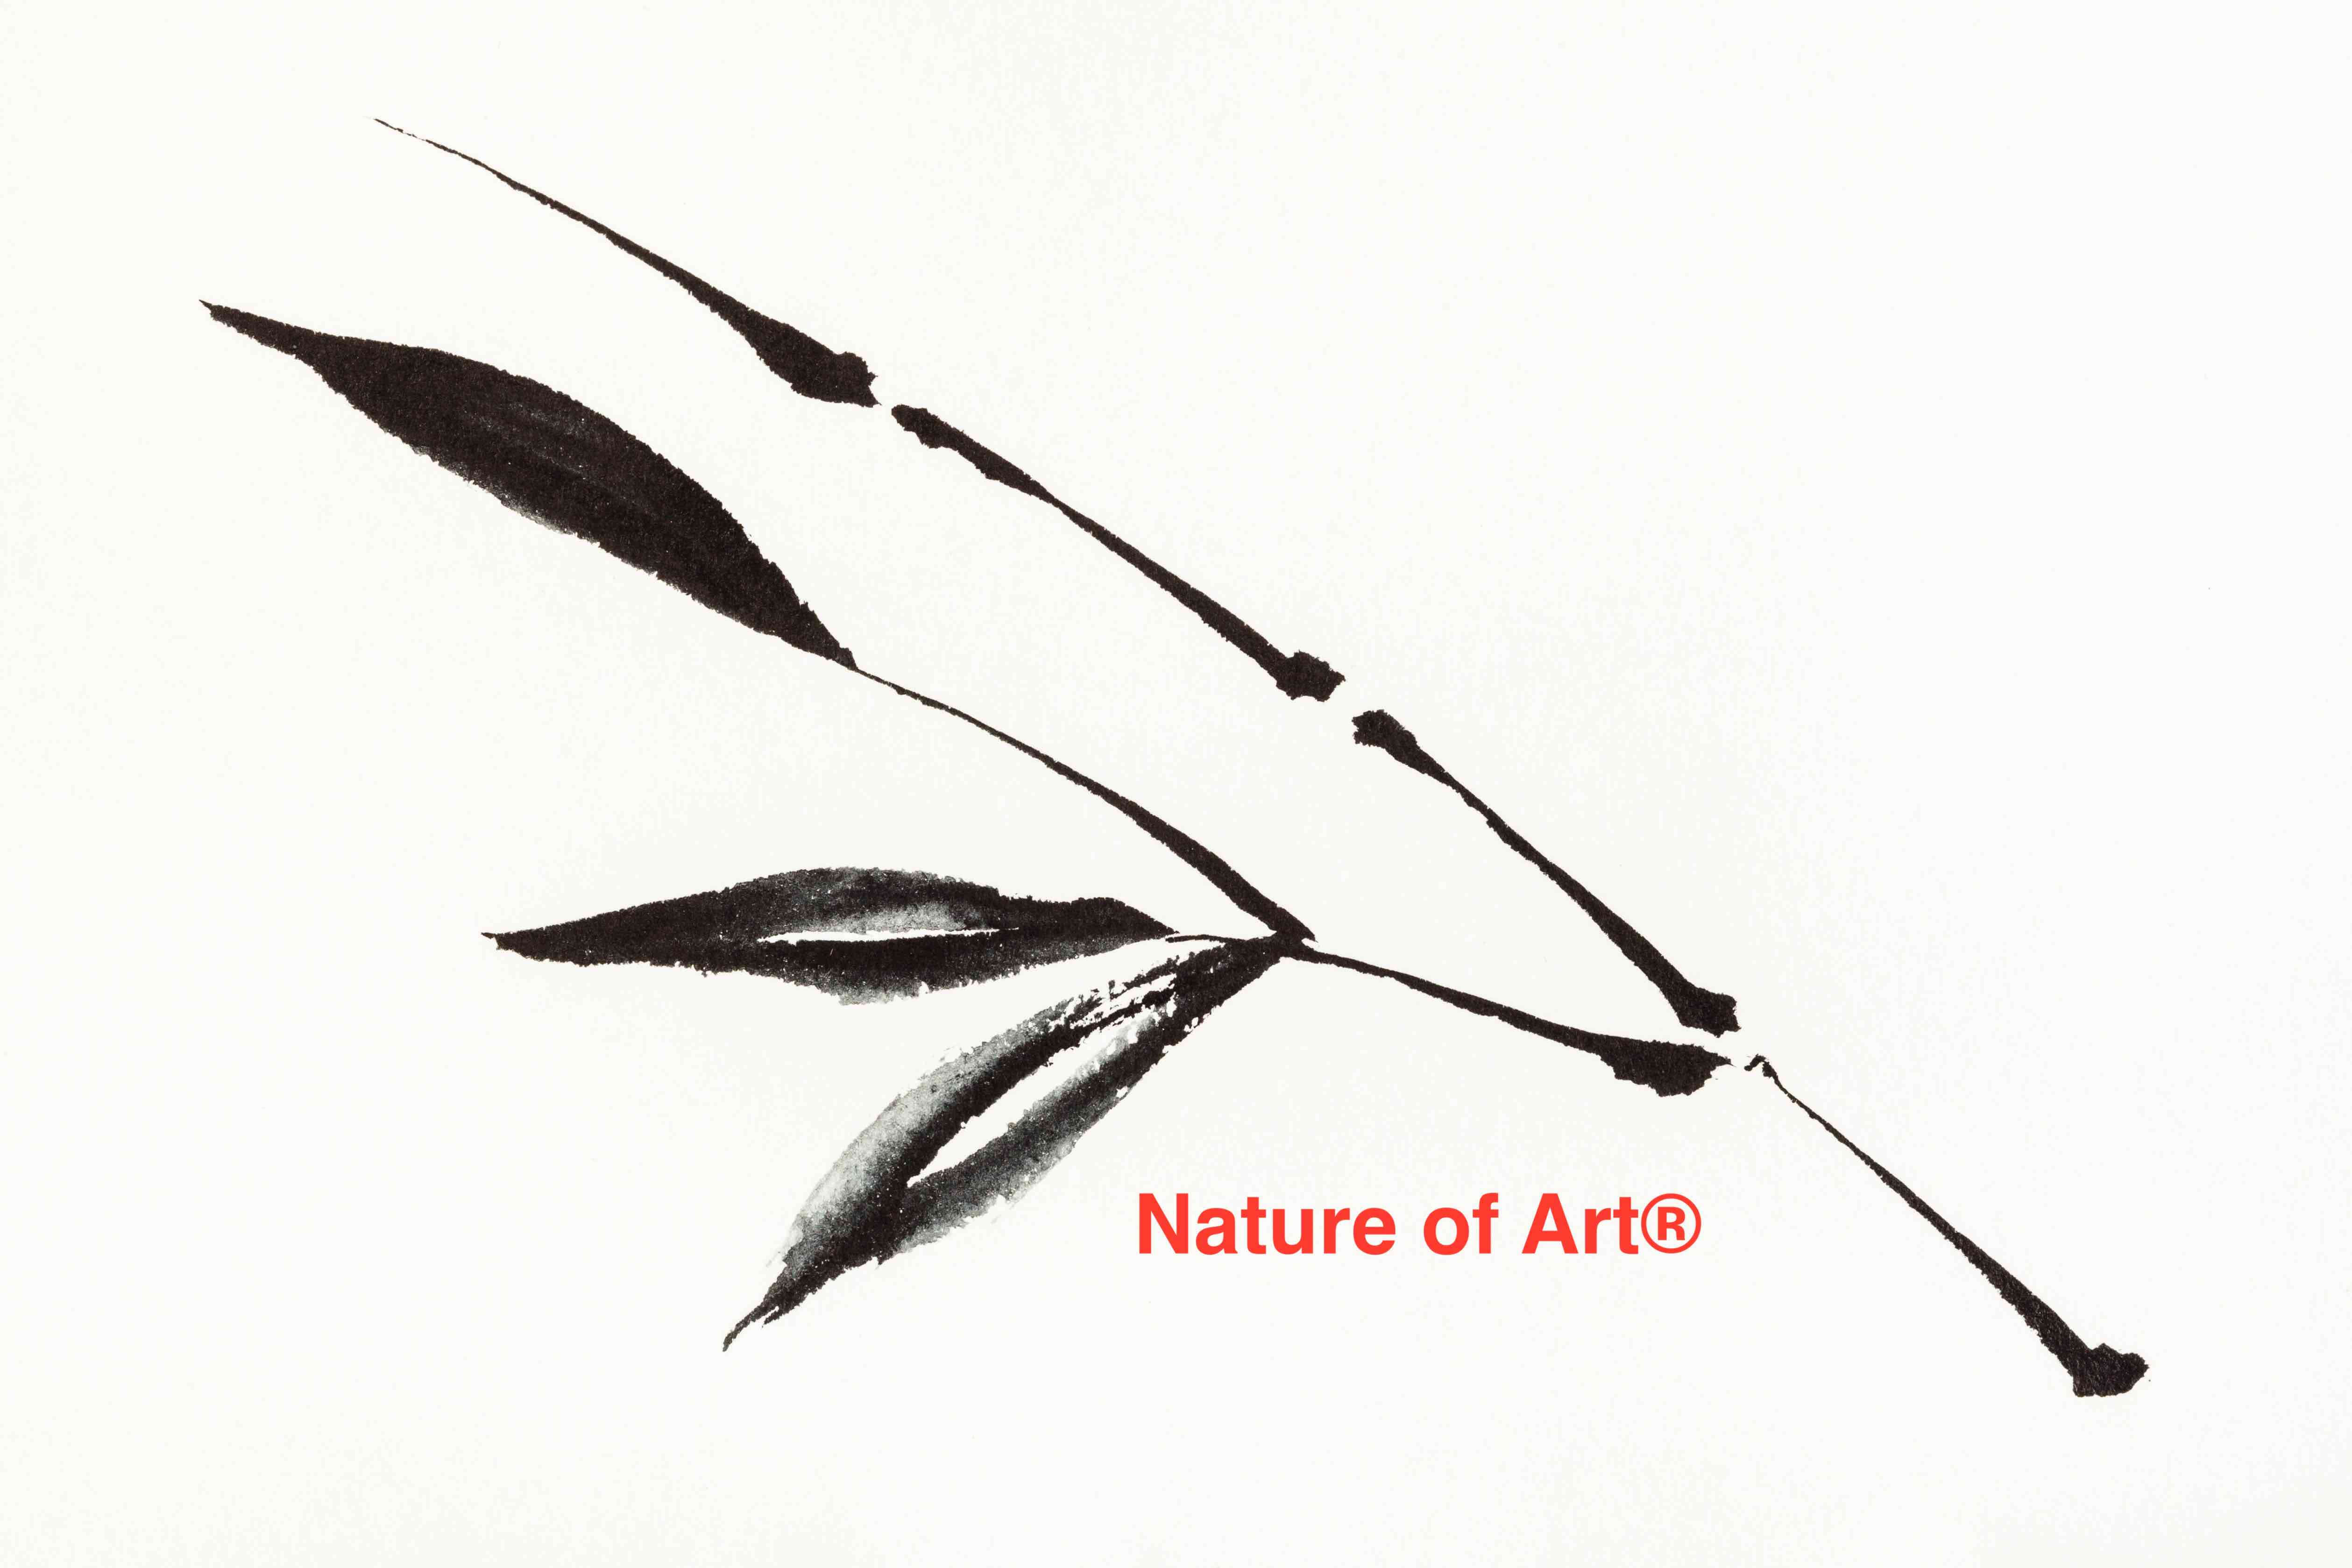 Kids Painting, Sumi-e, Chinese Ink Art, How-to lesson - Nature of Art®